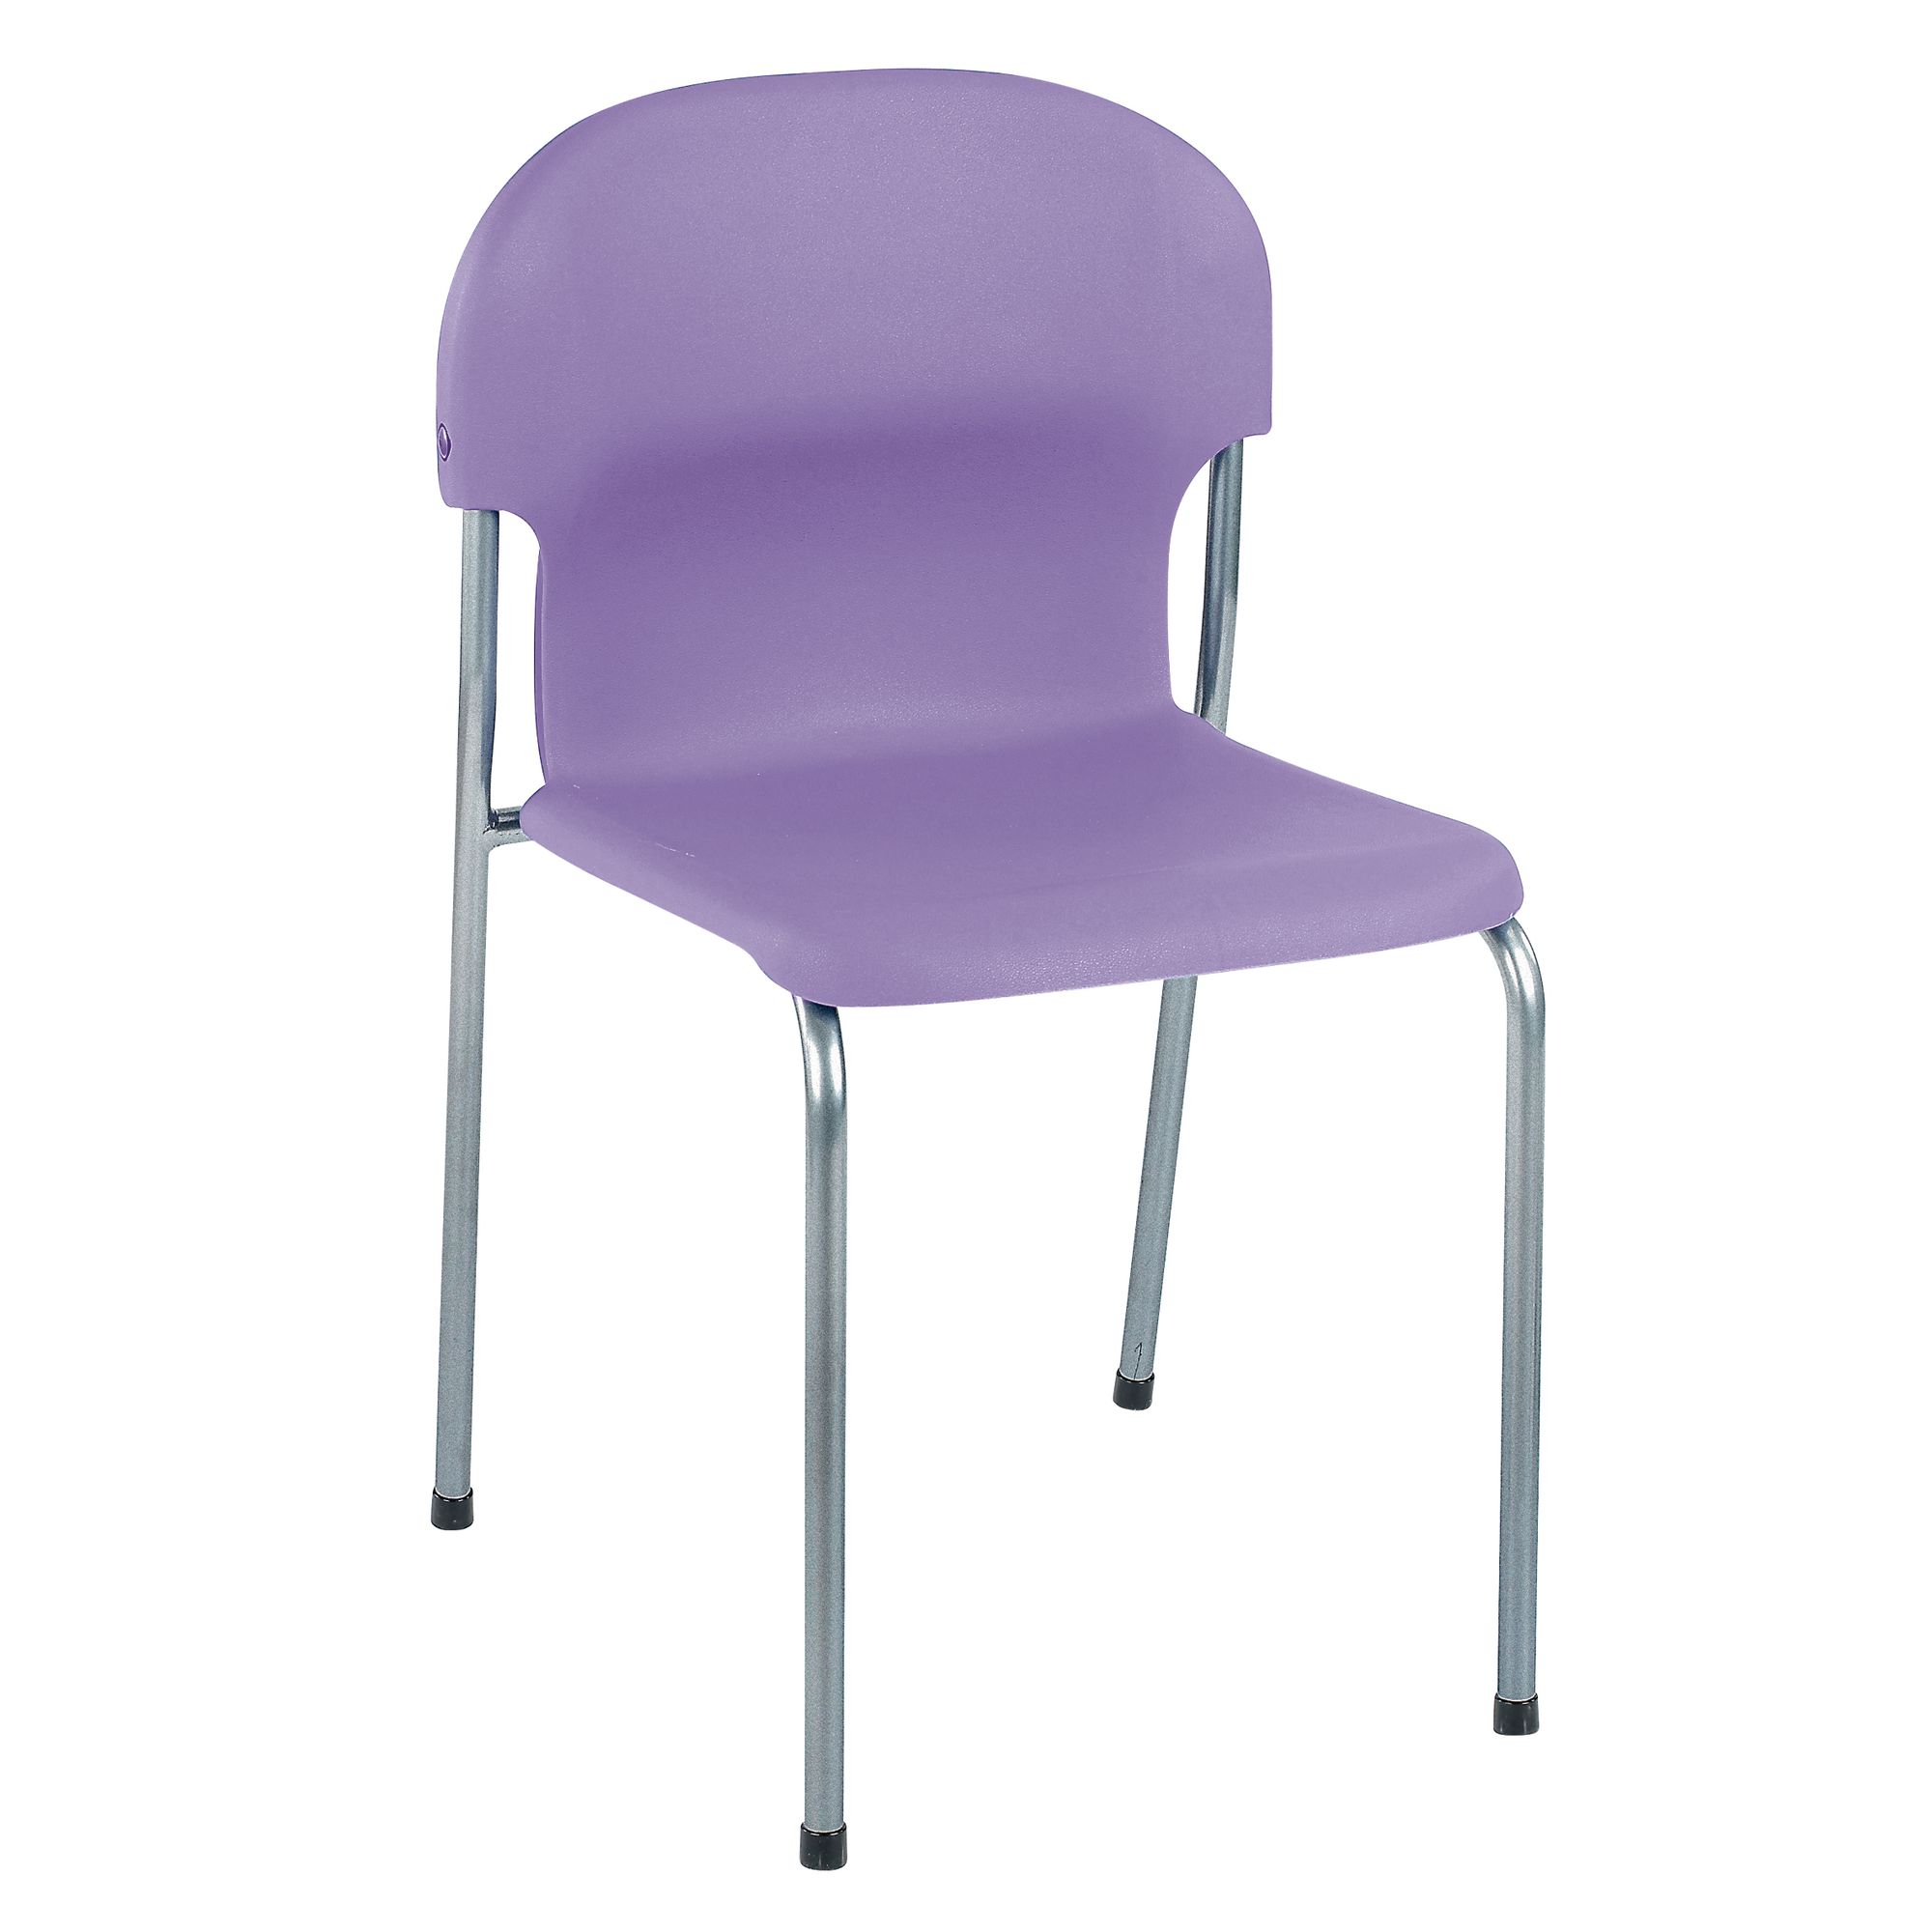 Chair 2000 H380mm - Lilac